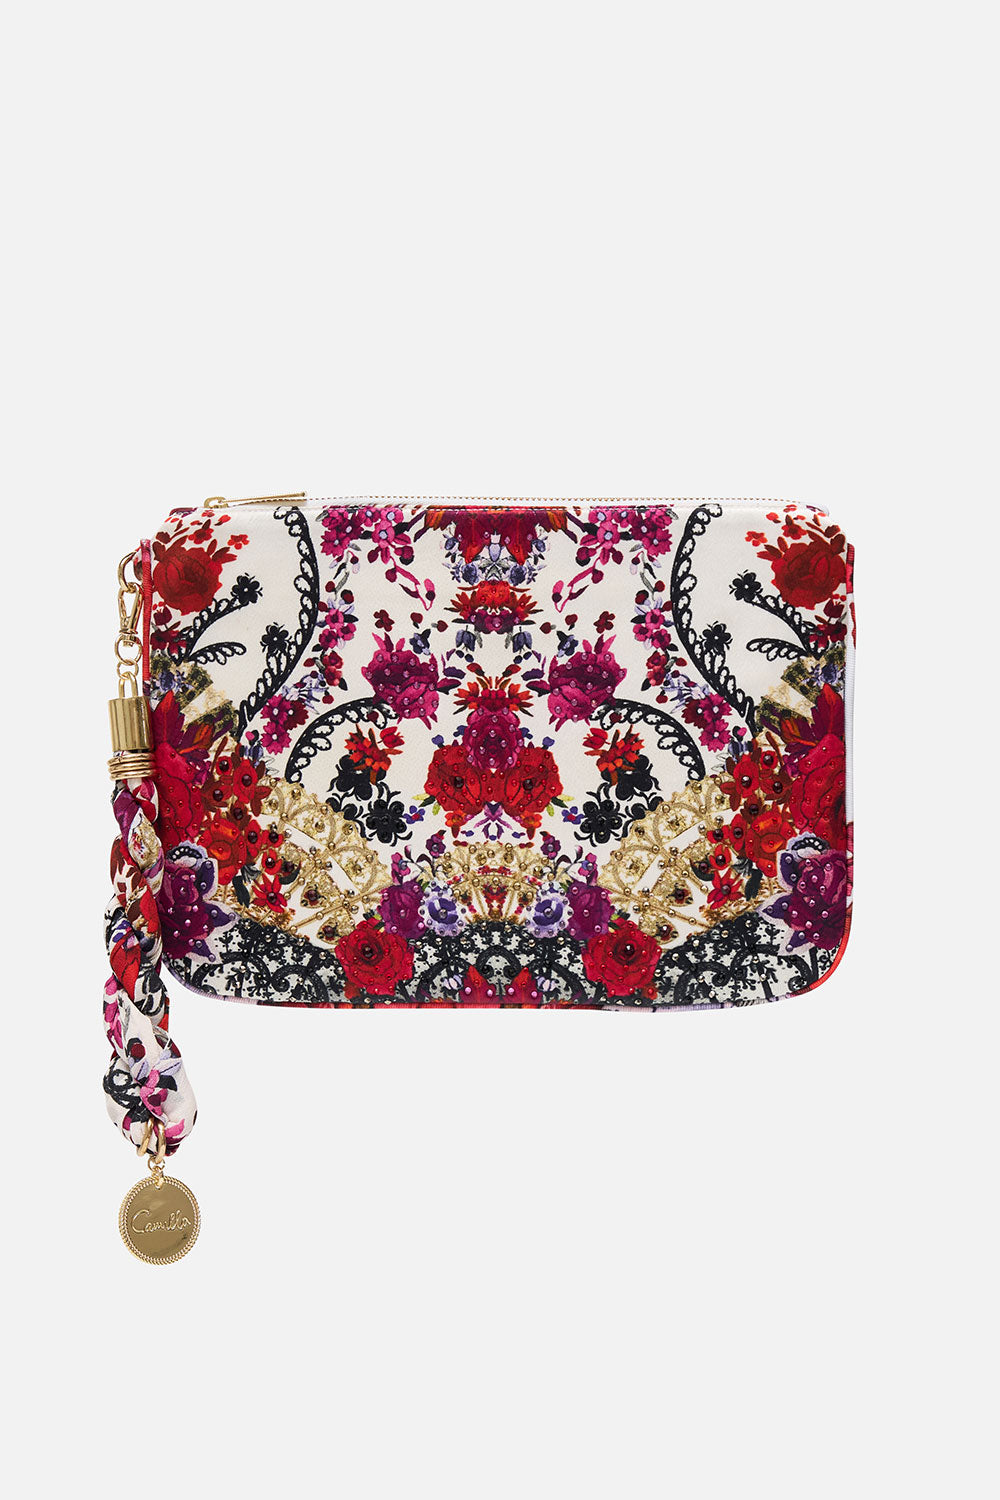 SCARF CLUTCH REIGN OF ROSES